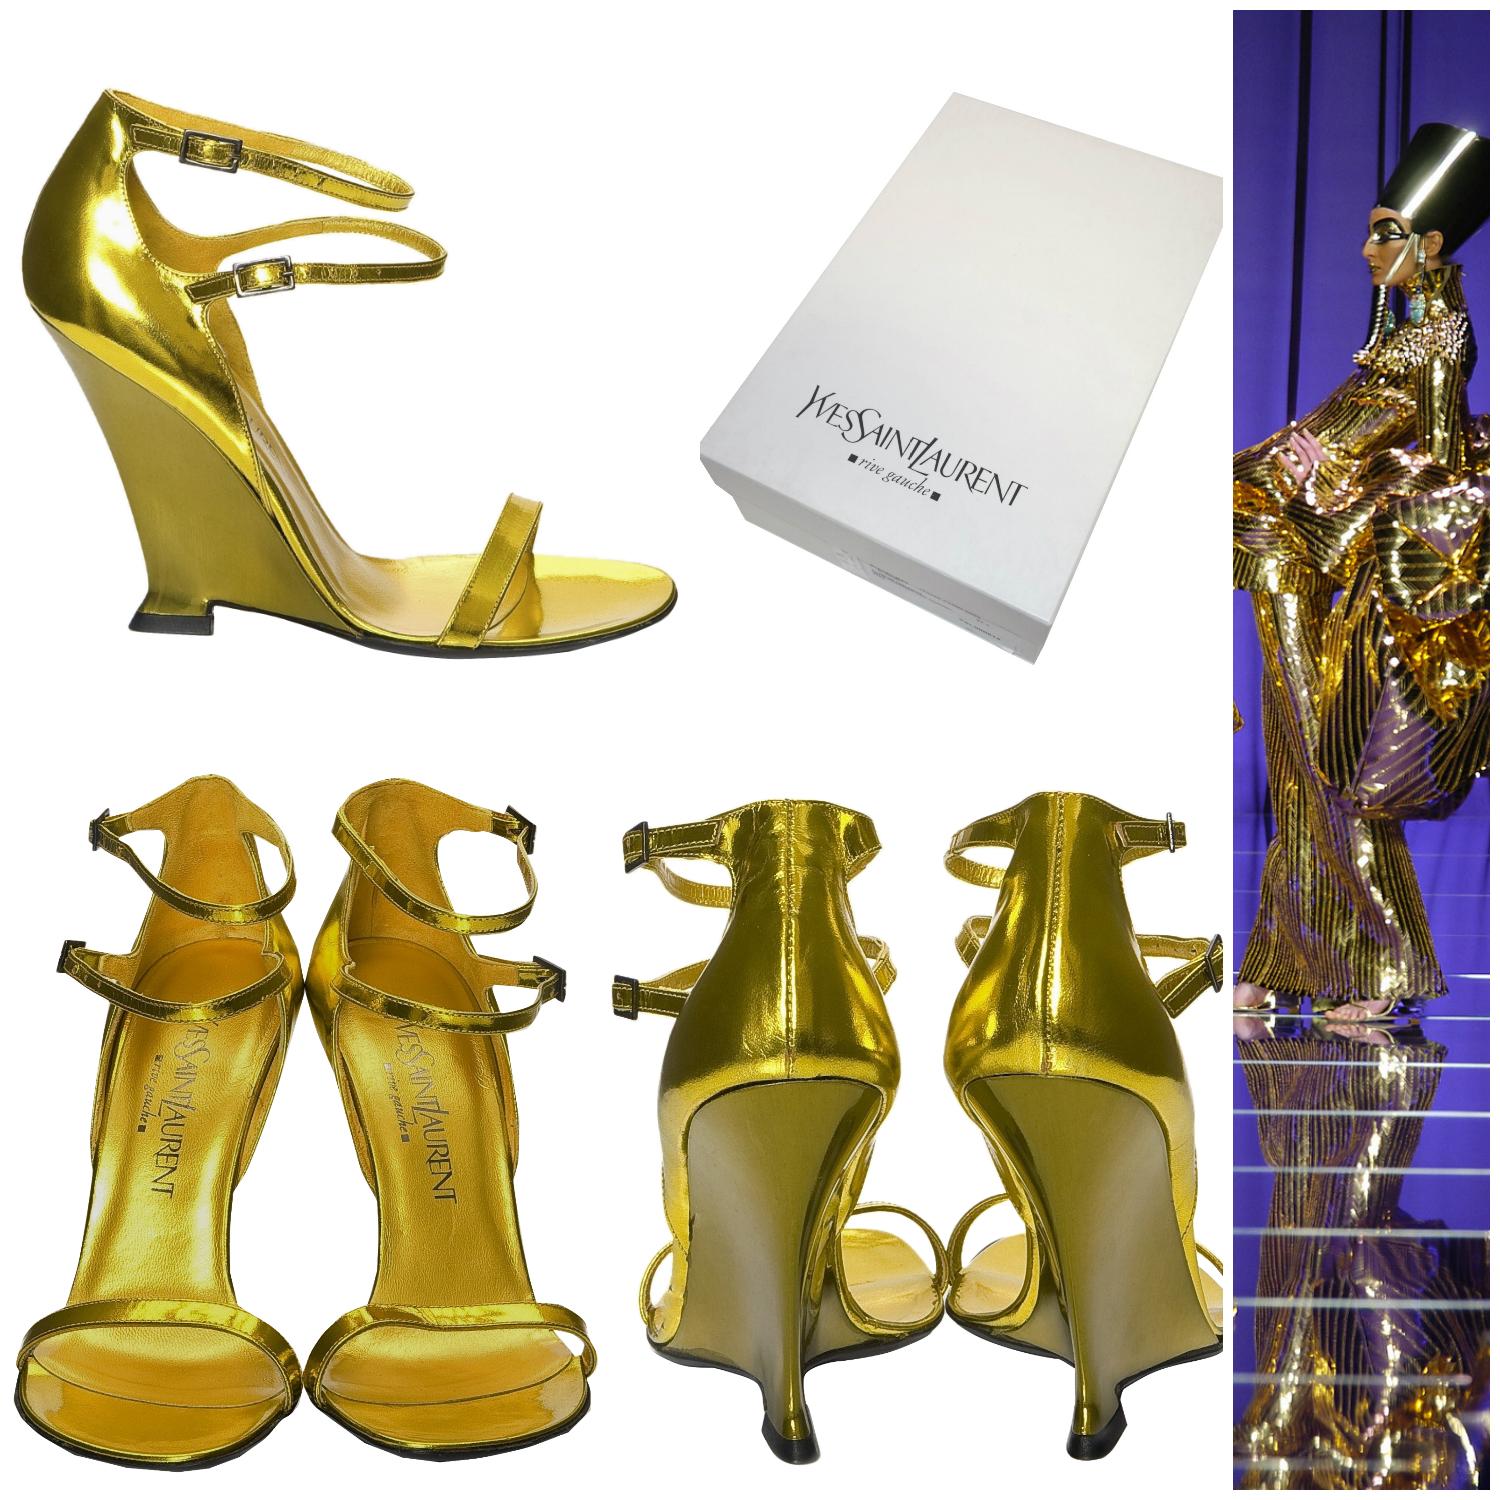 Yves Saint Laurent Heels
Brand New
Size: 38.5
* Tom Ford Era Final Collection Heels
* This was his last collection for Yves Saint Laurent. He was inspired by the Chinese Collection of 1977.  
This Collection was Featured at the Metropolitan Museum